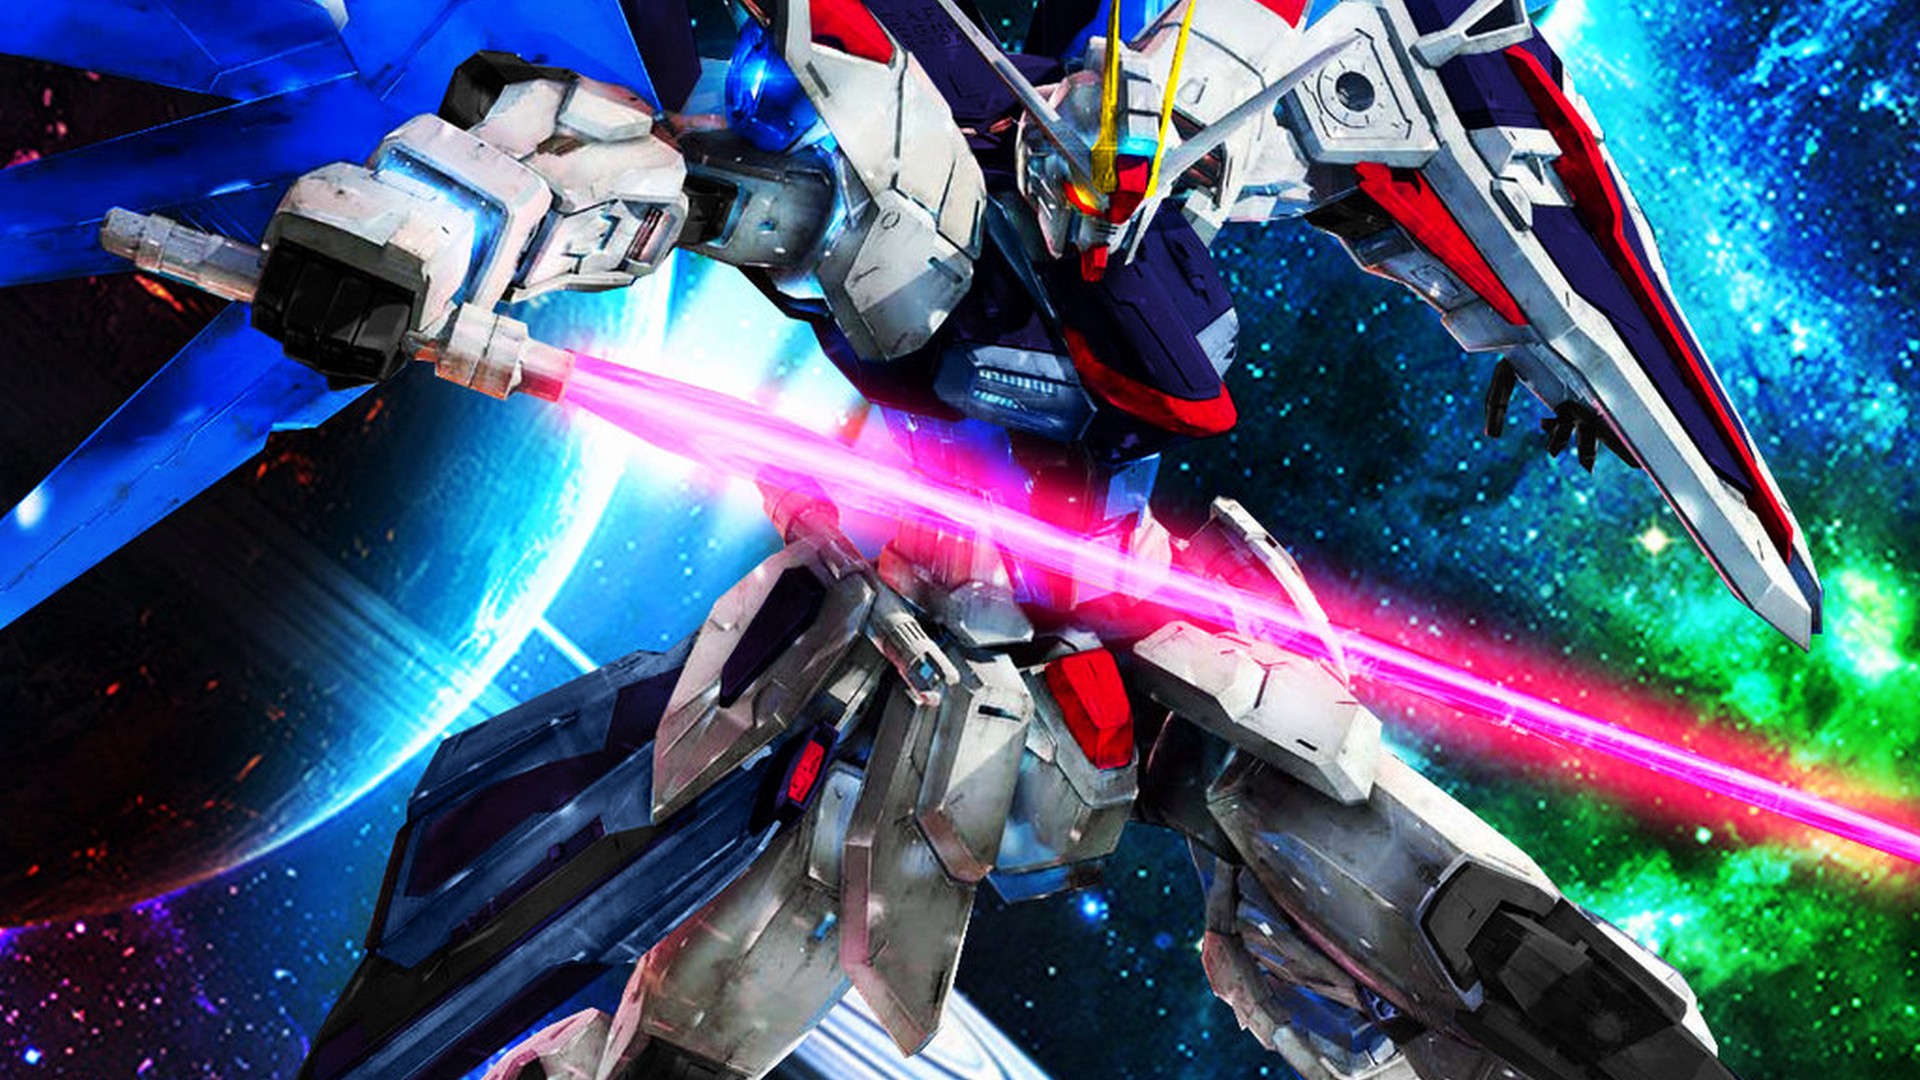 Gundam Wallpaper 3d For Android Image Num 87.